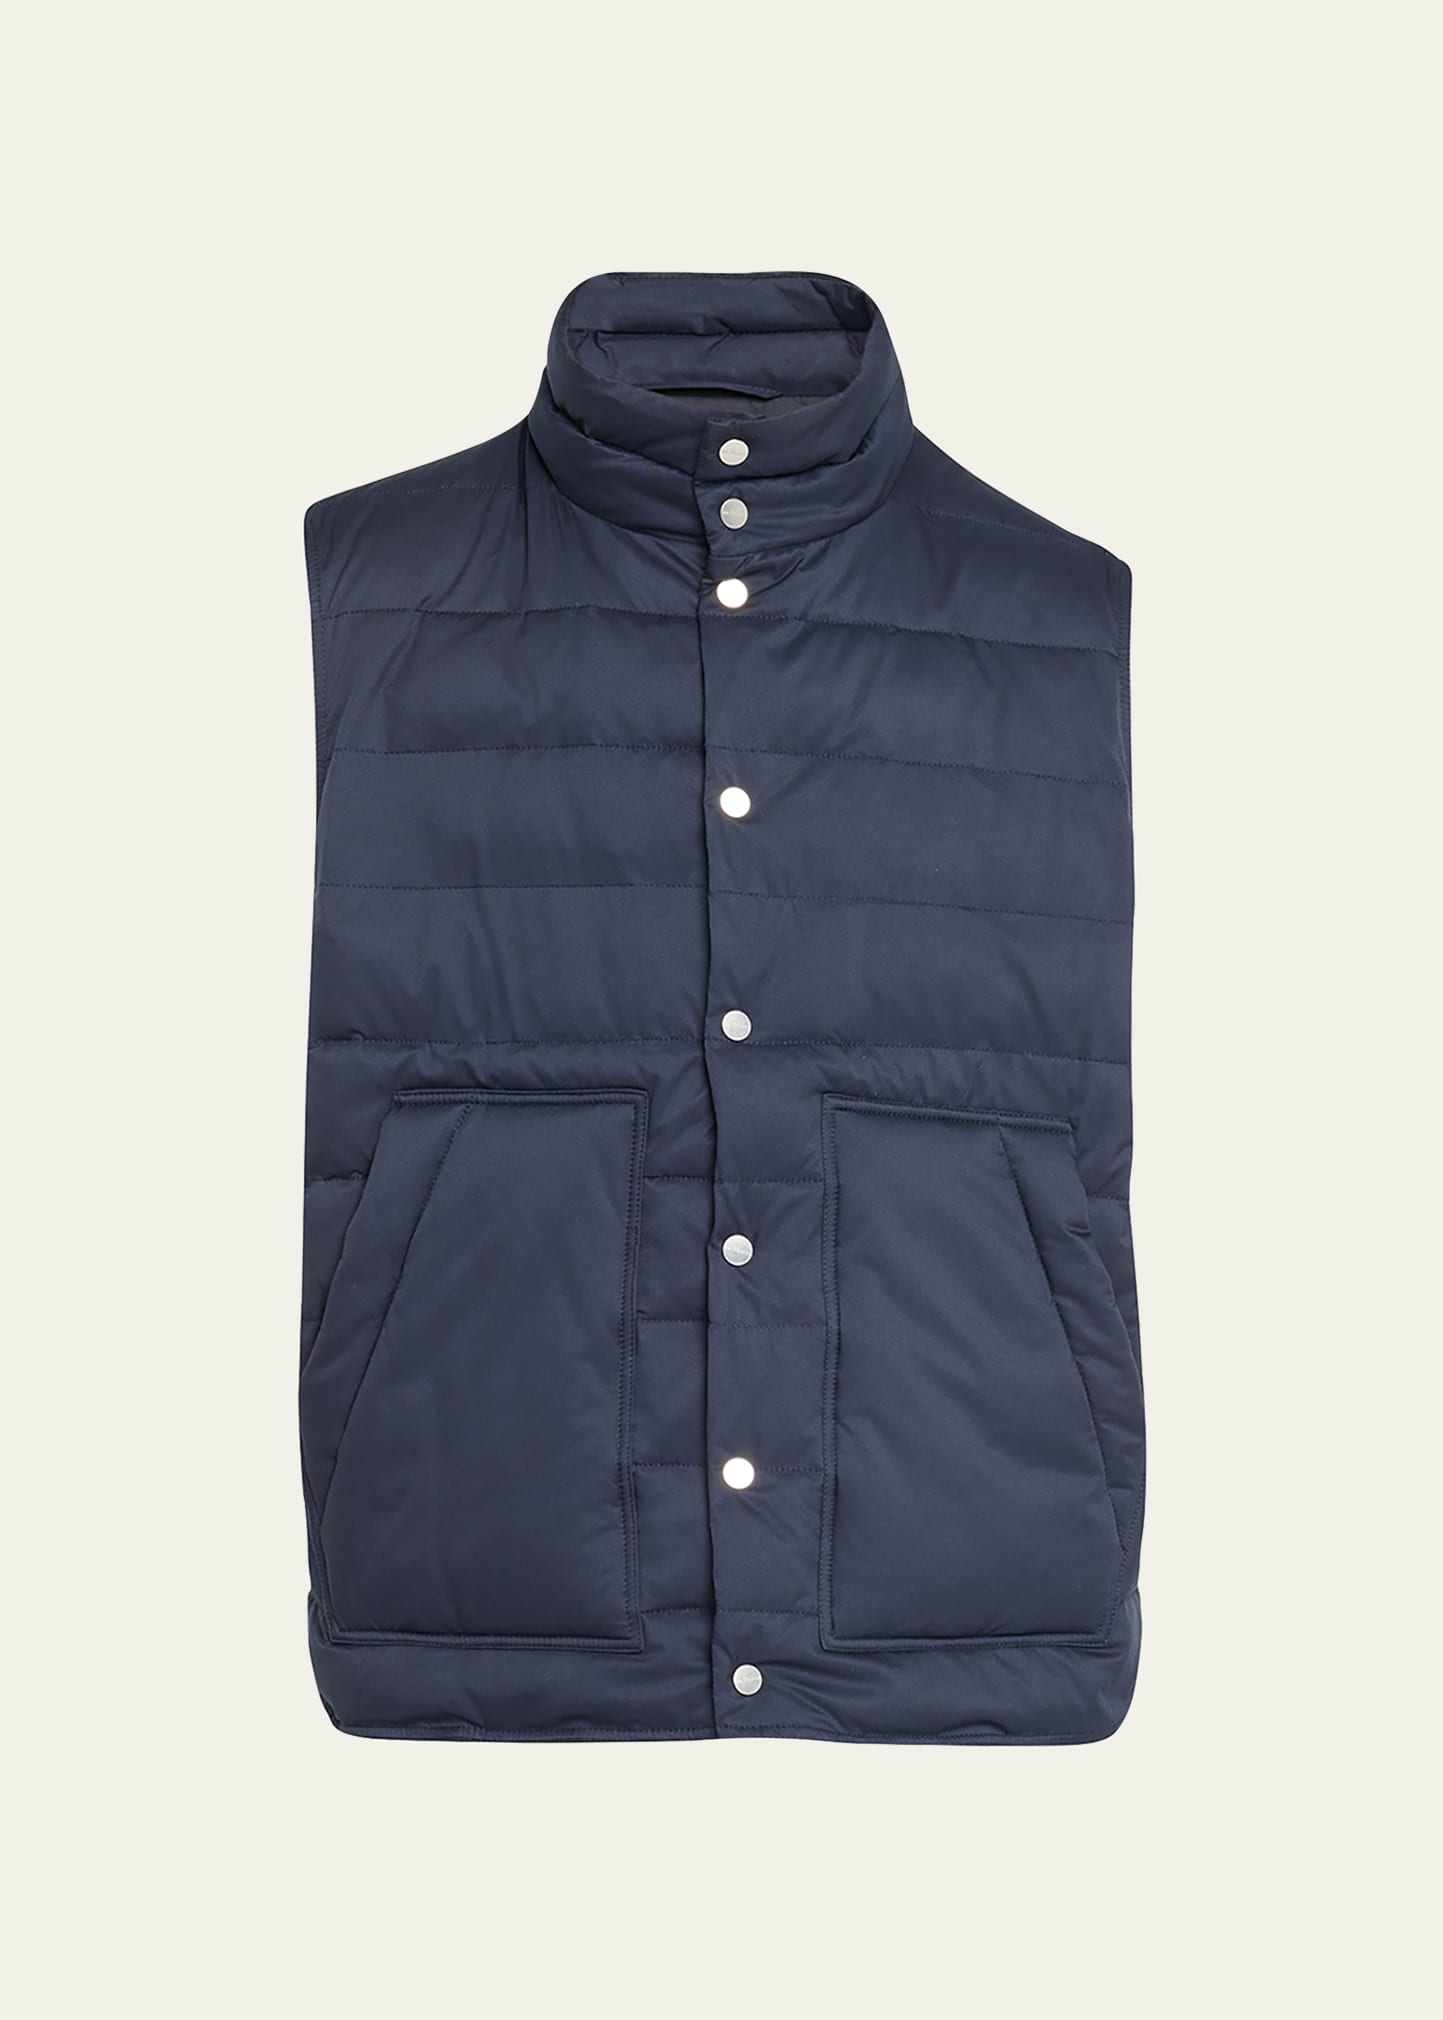 Kiton Men's Navy Quilted Puffer Vest